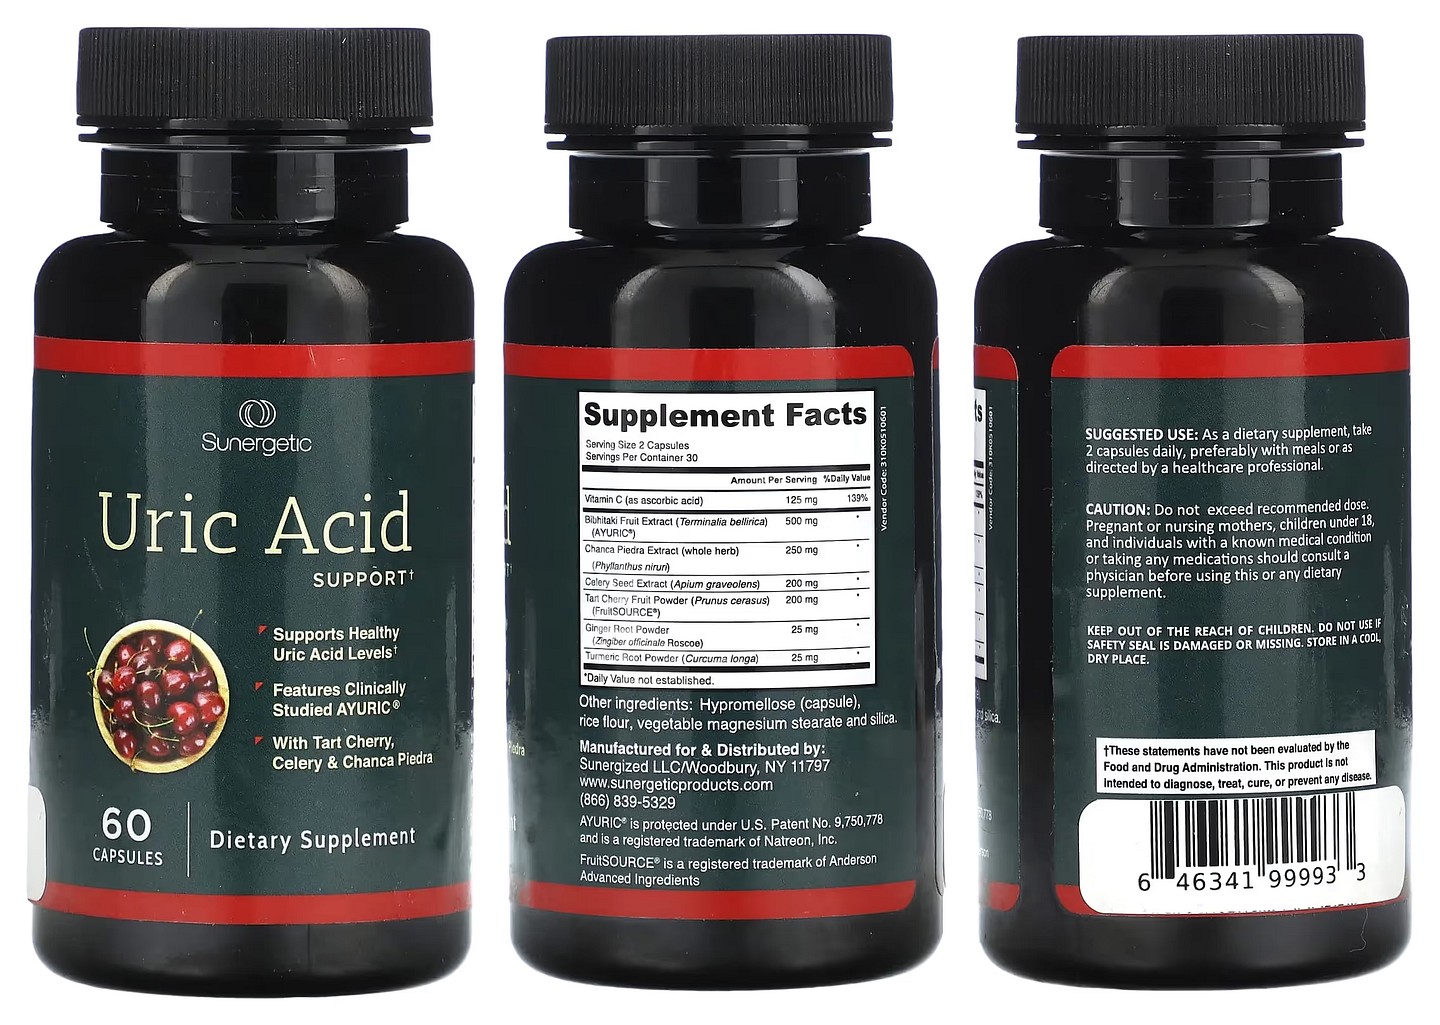 Sunergetic, Uric Acid Support packaging